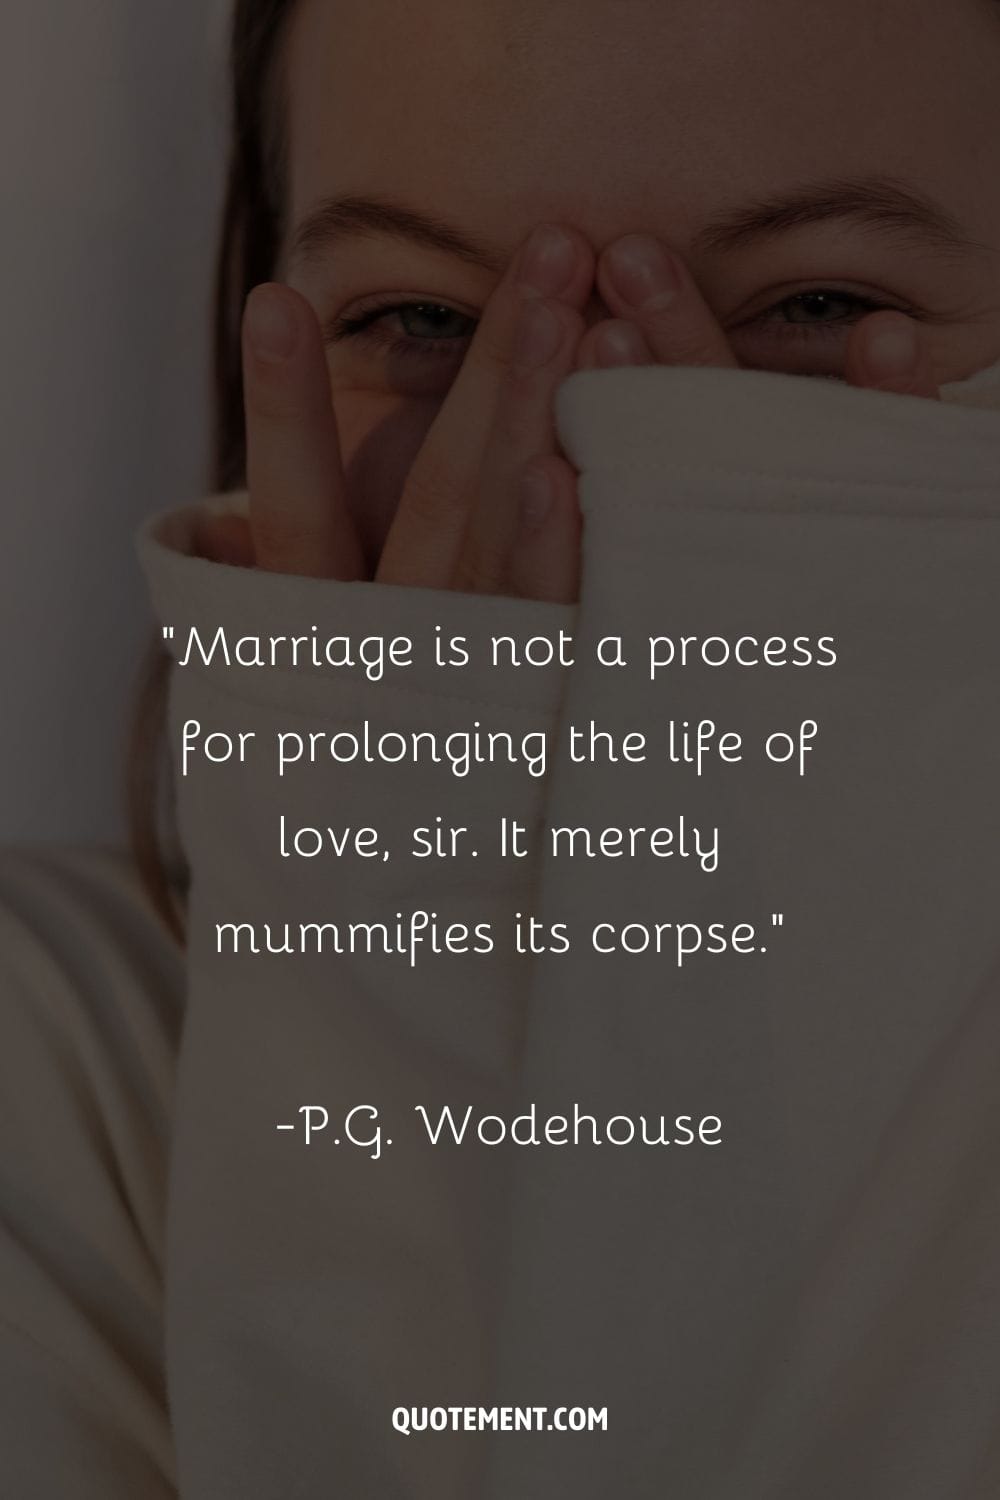 “Marriage is not a process for prolonging the life of love, sir. It merely mummifies its corpse.” ― P.G. Wodehouse, The Small Bachelor